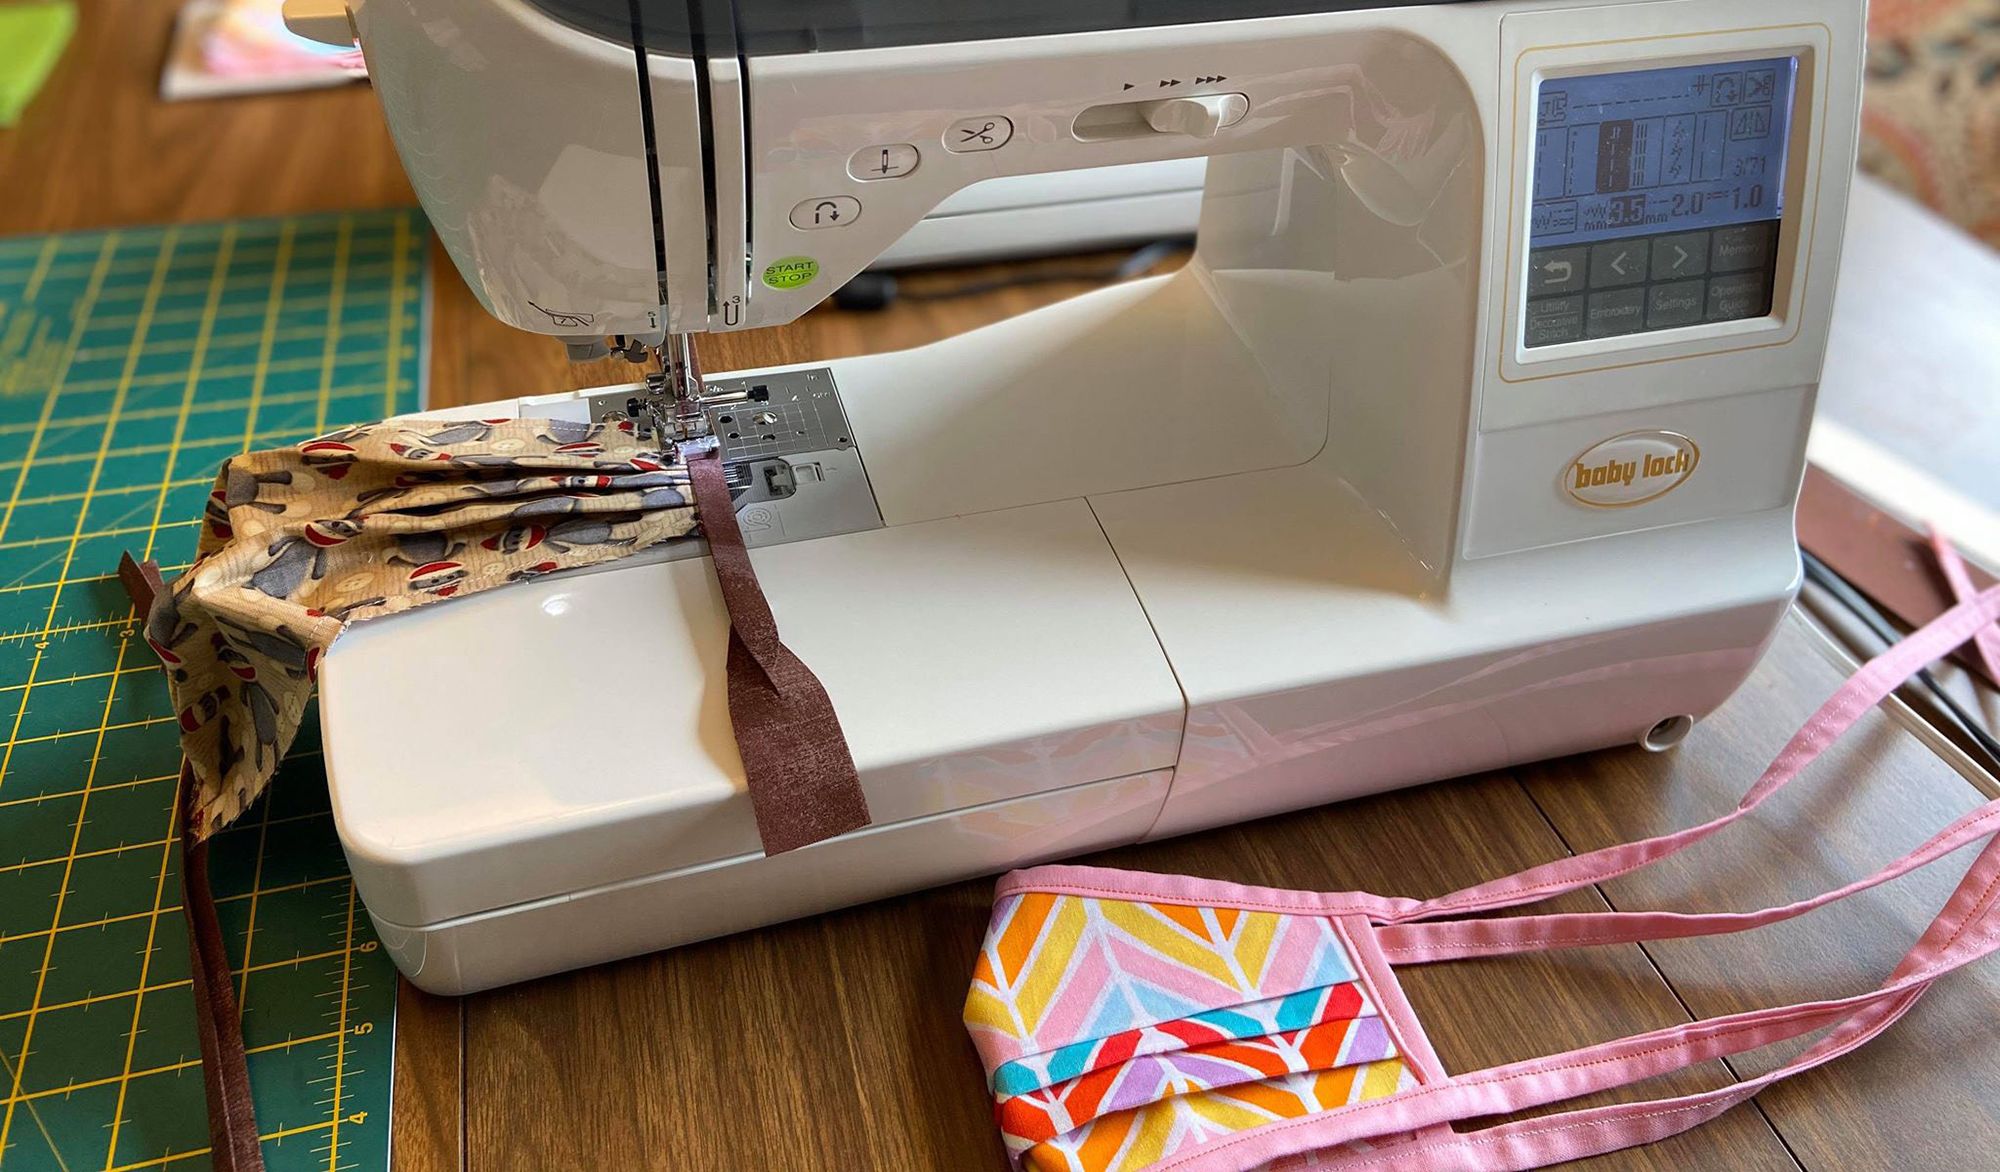 Dressmaking for beginners – all about sewing machines